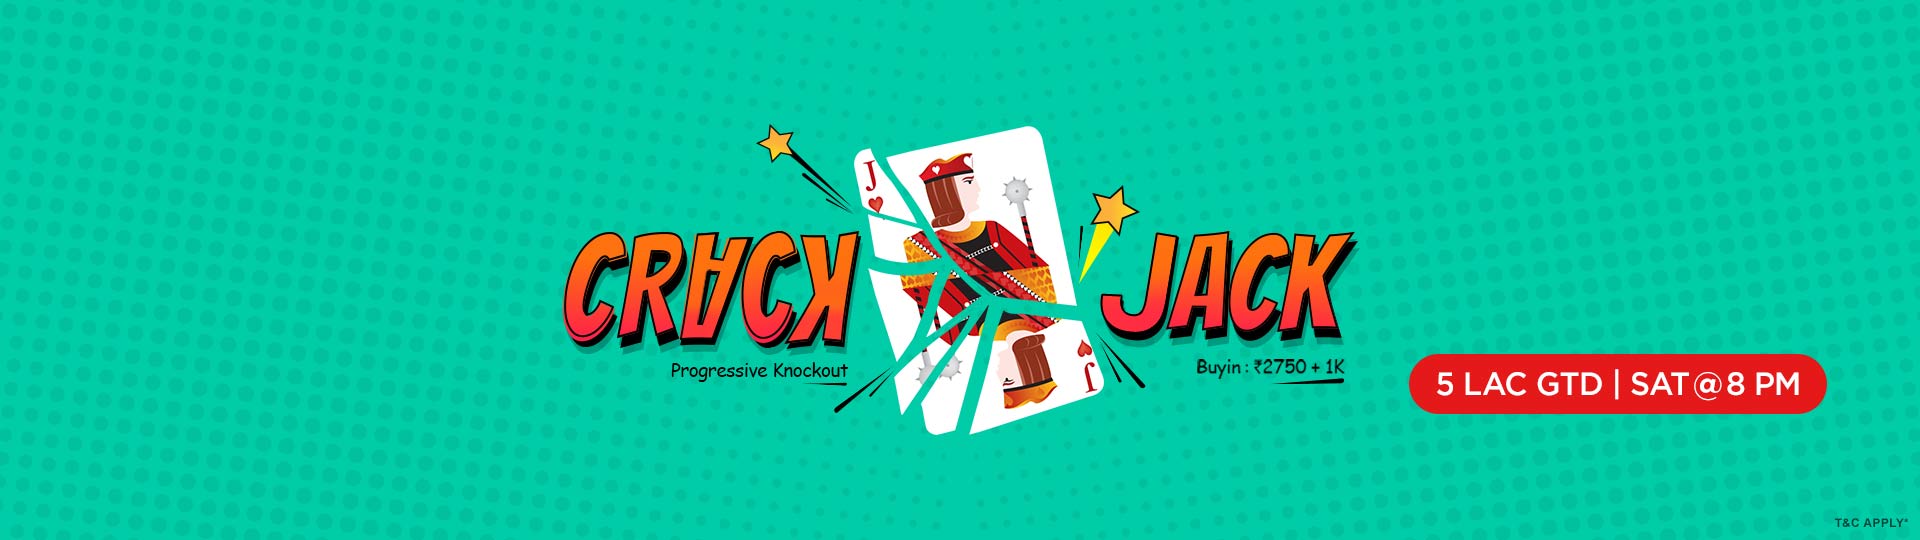 Win 5 Lac GTD: Play in Crack-Jack Poker Tournament on Adda52